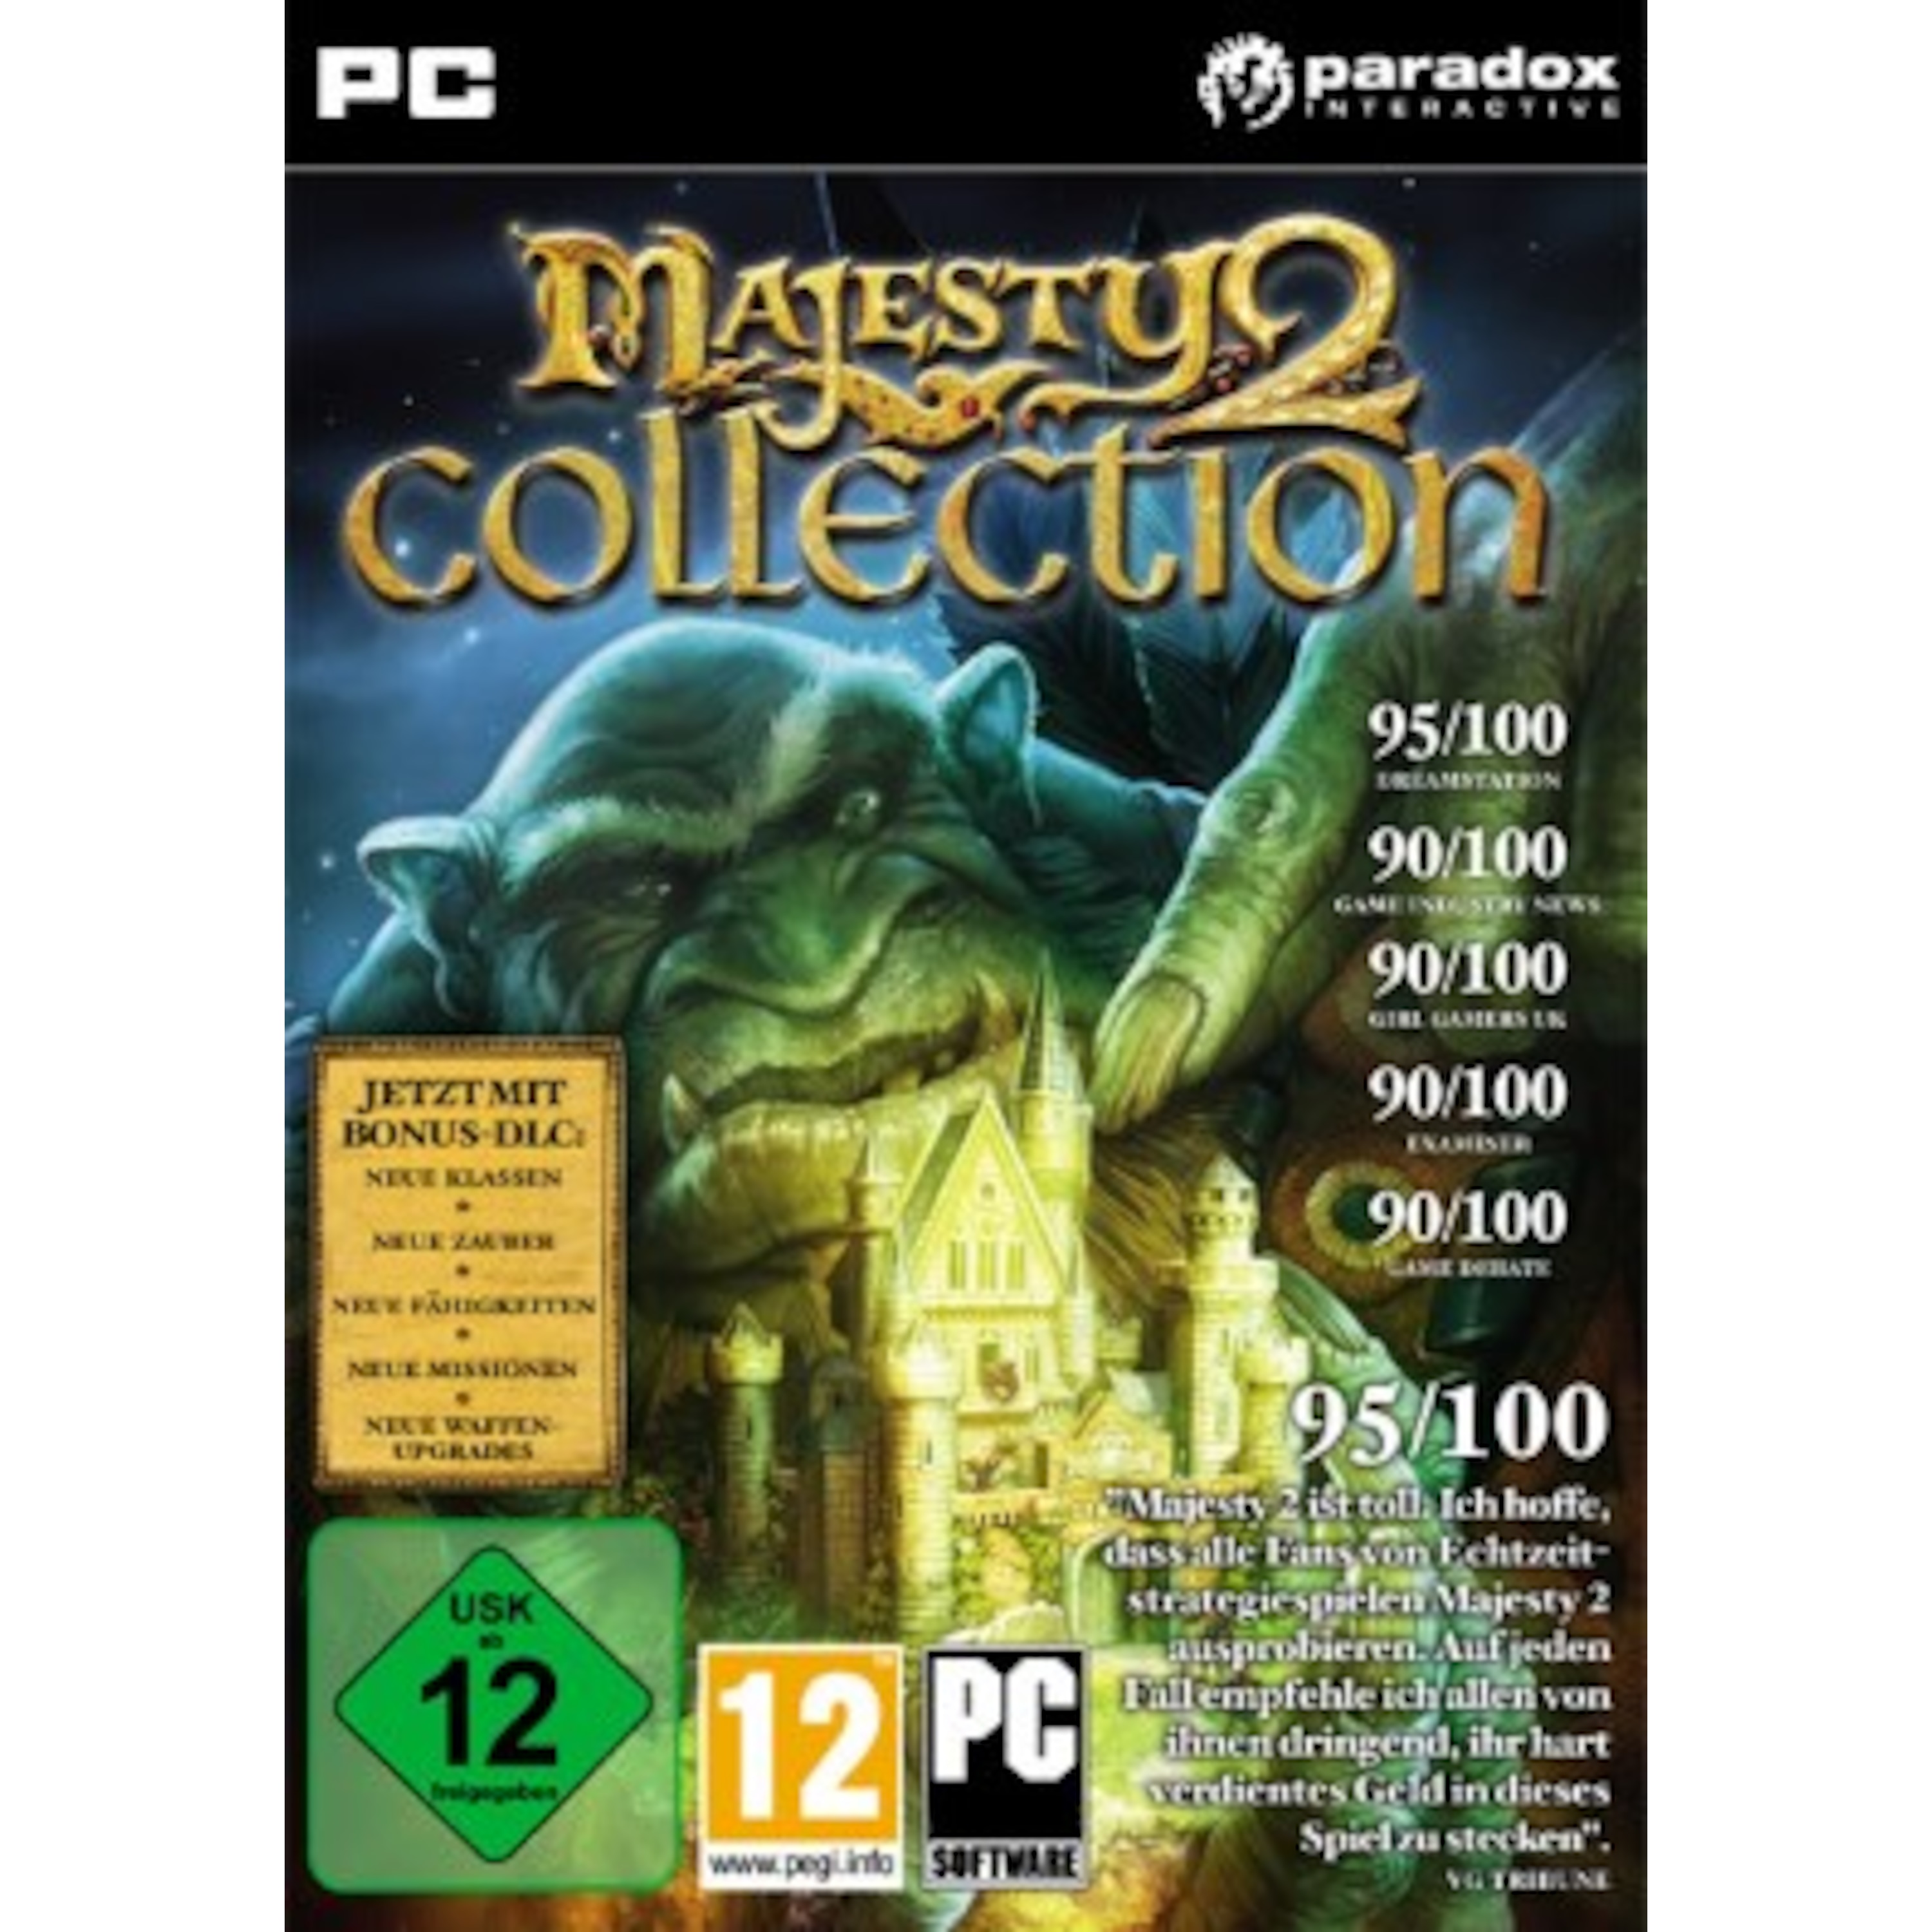 majesty 2 collection in game shop no internet connection